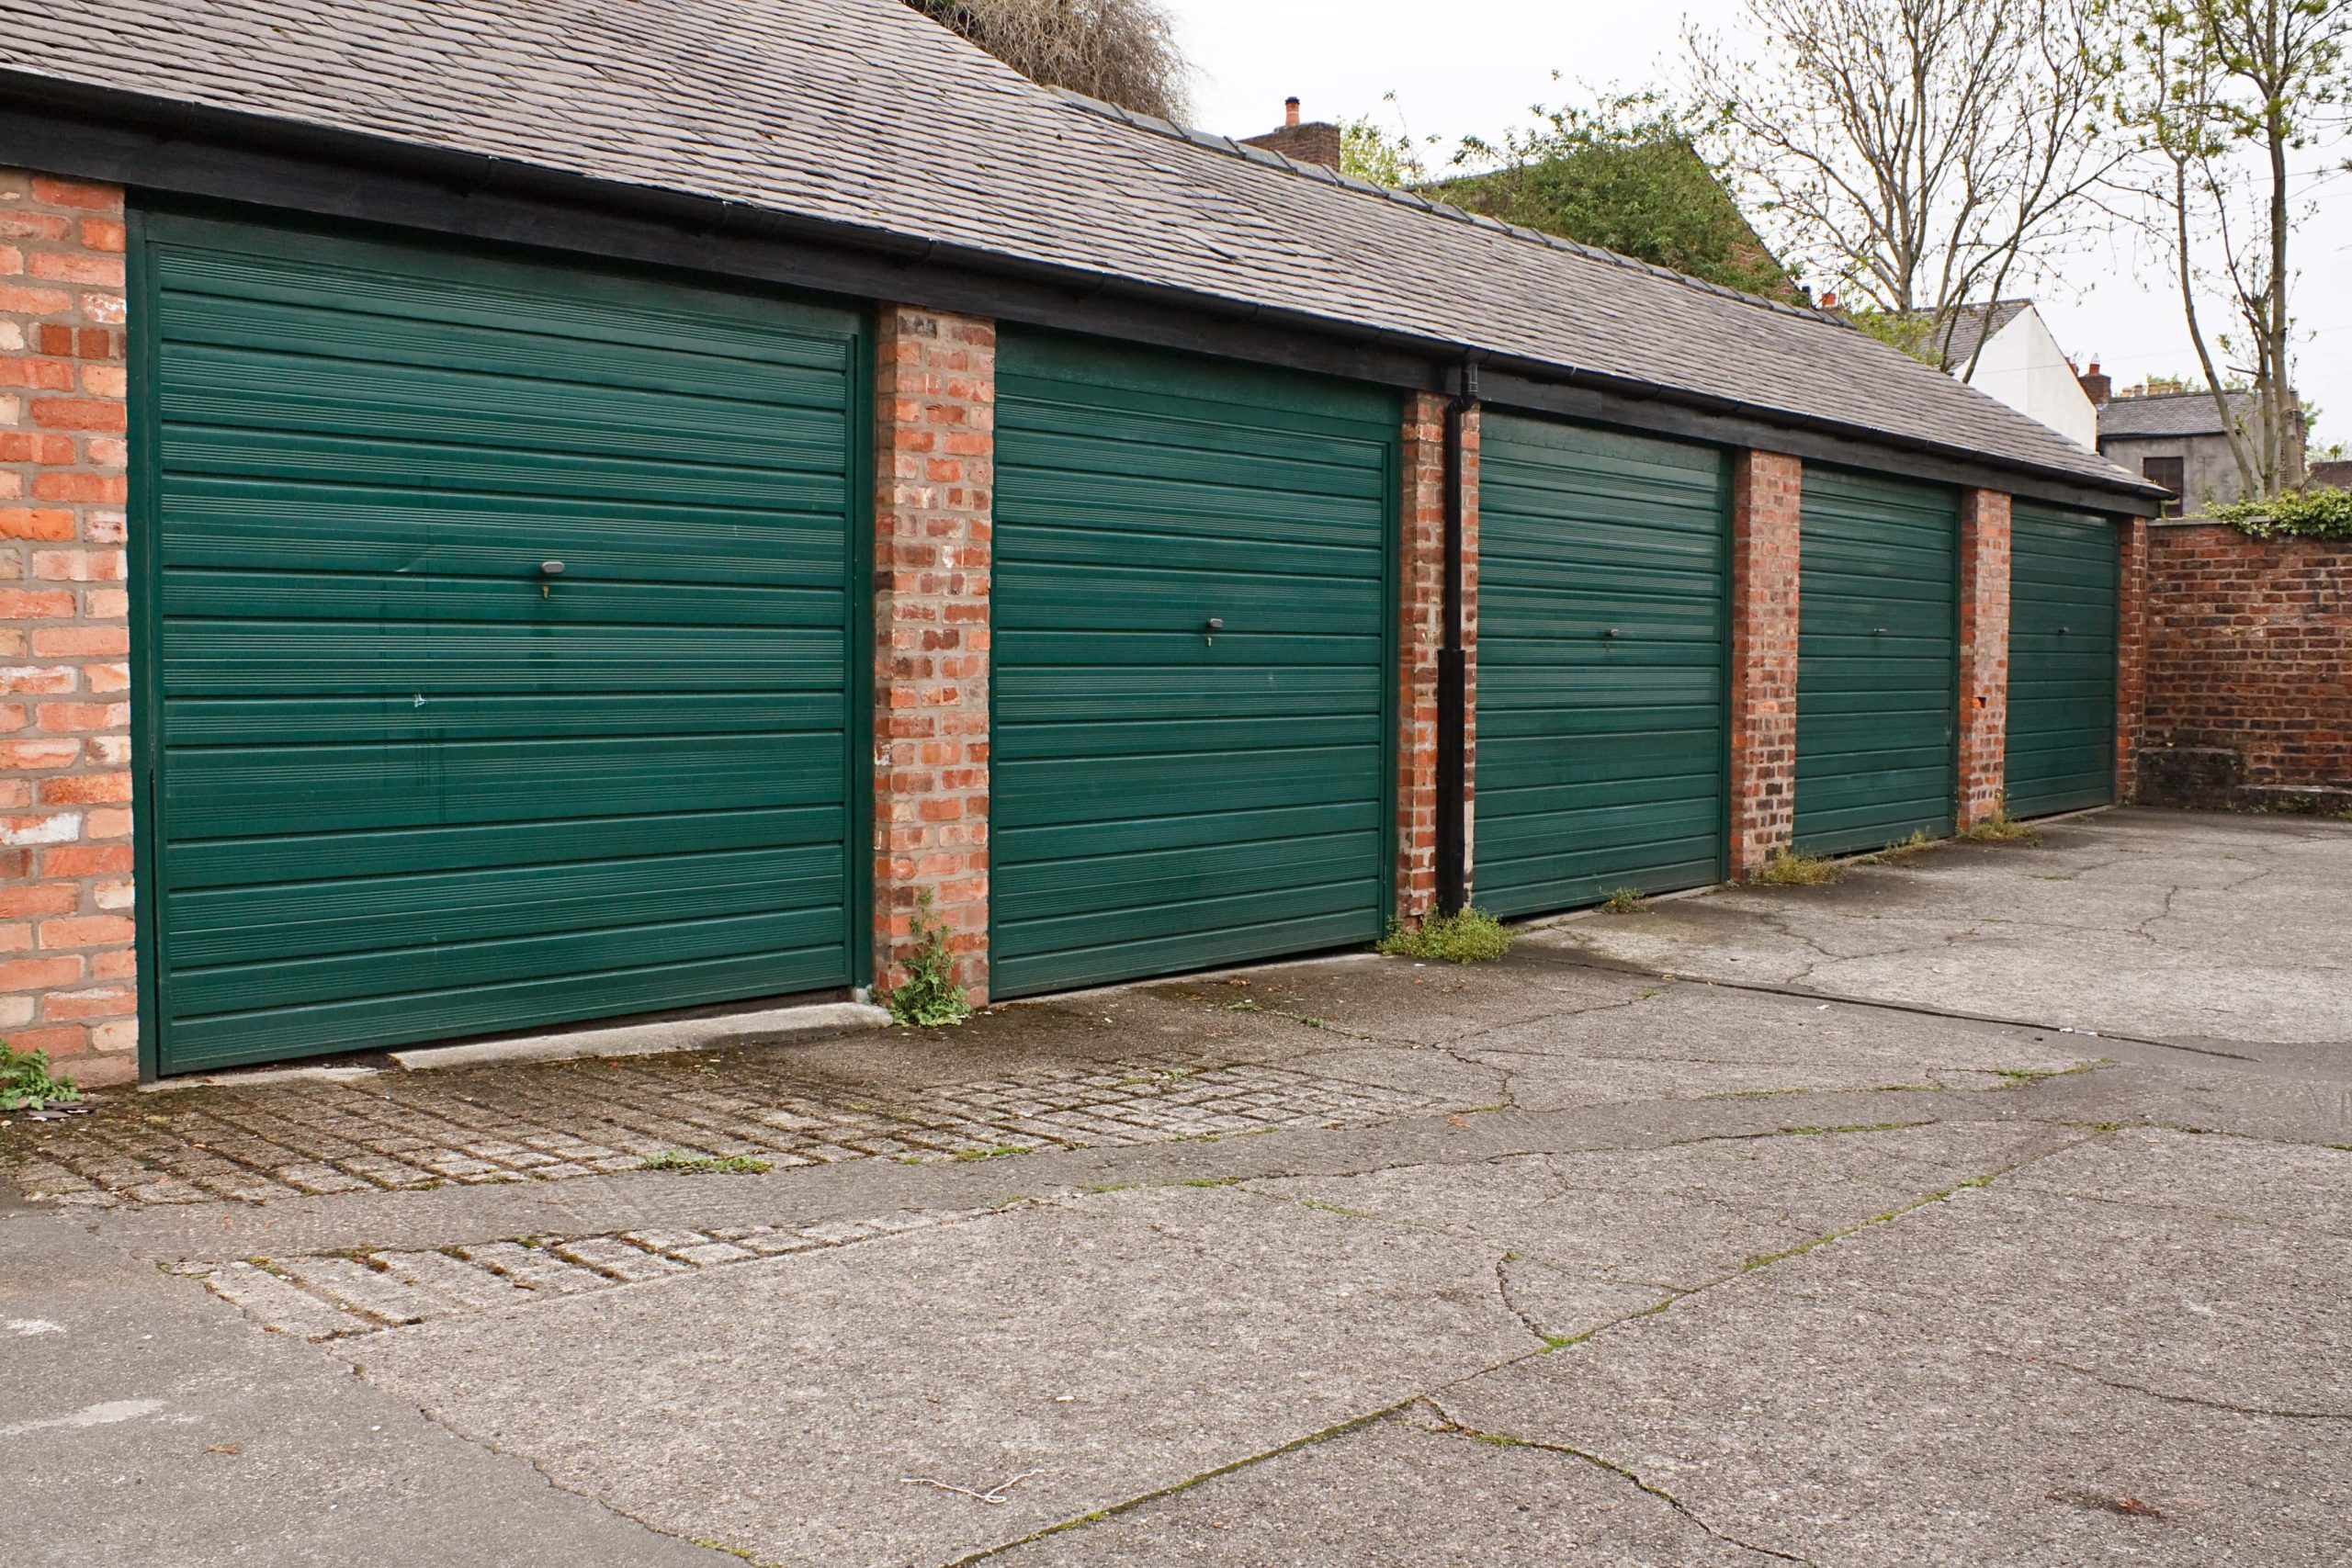 Trivallis Housing Landlord Wales A row of green garage doors along a Trivallis housing brick building, with a paved area in the foreground.